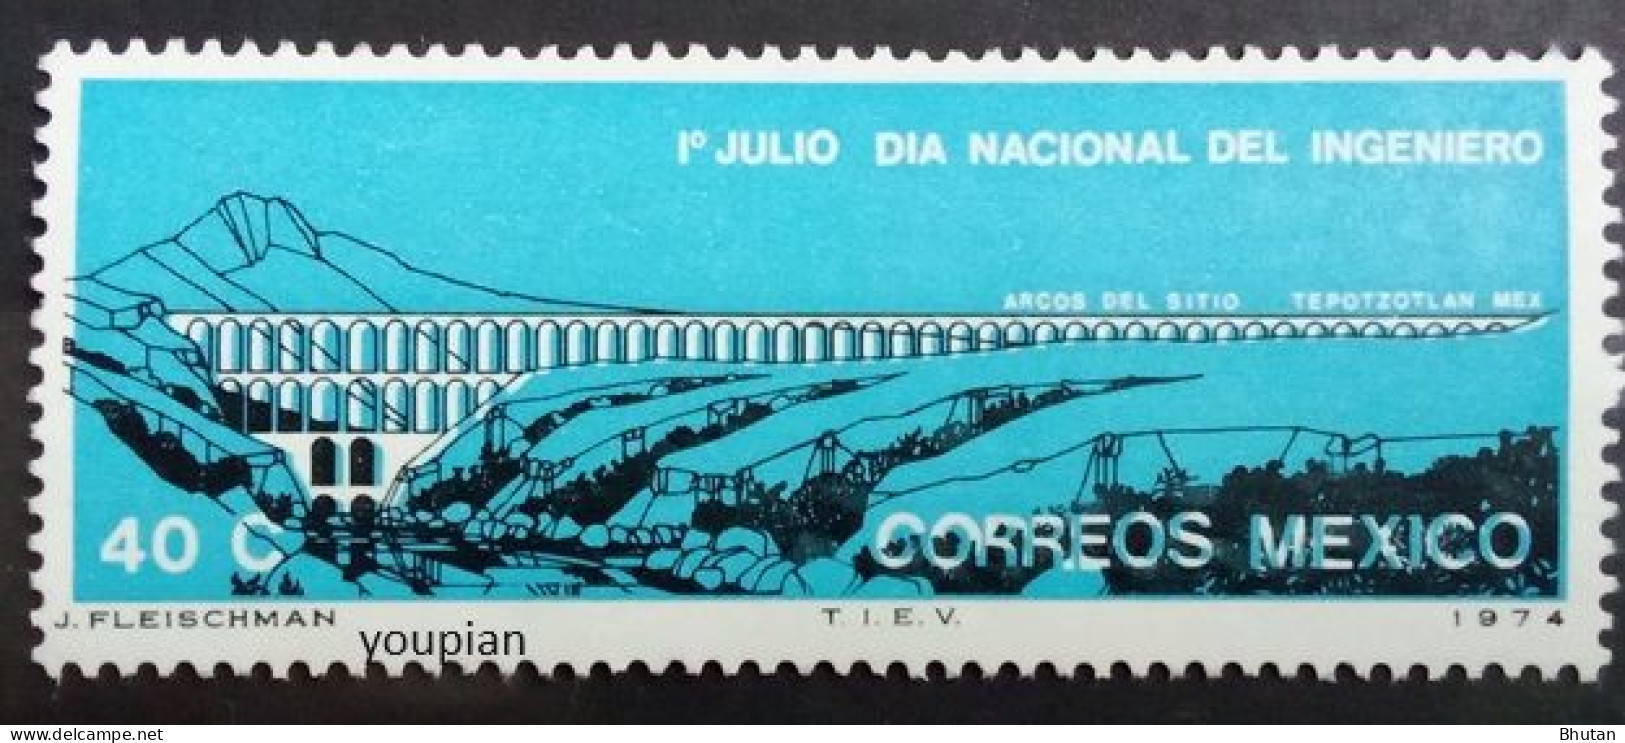 Mexico 1974, Day Of The Engineer, MNH Single Stamp - Mexique